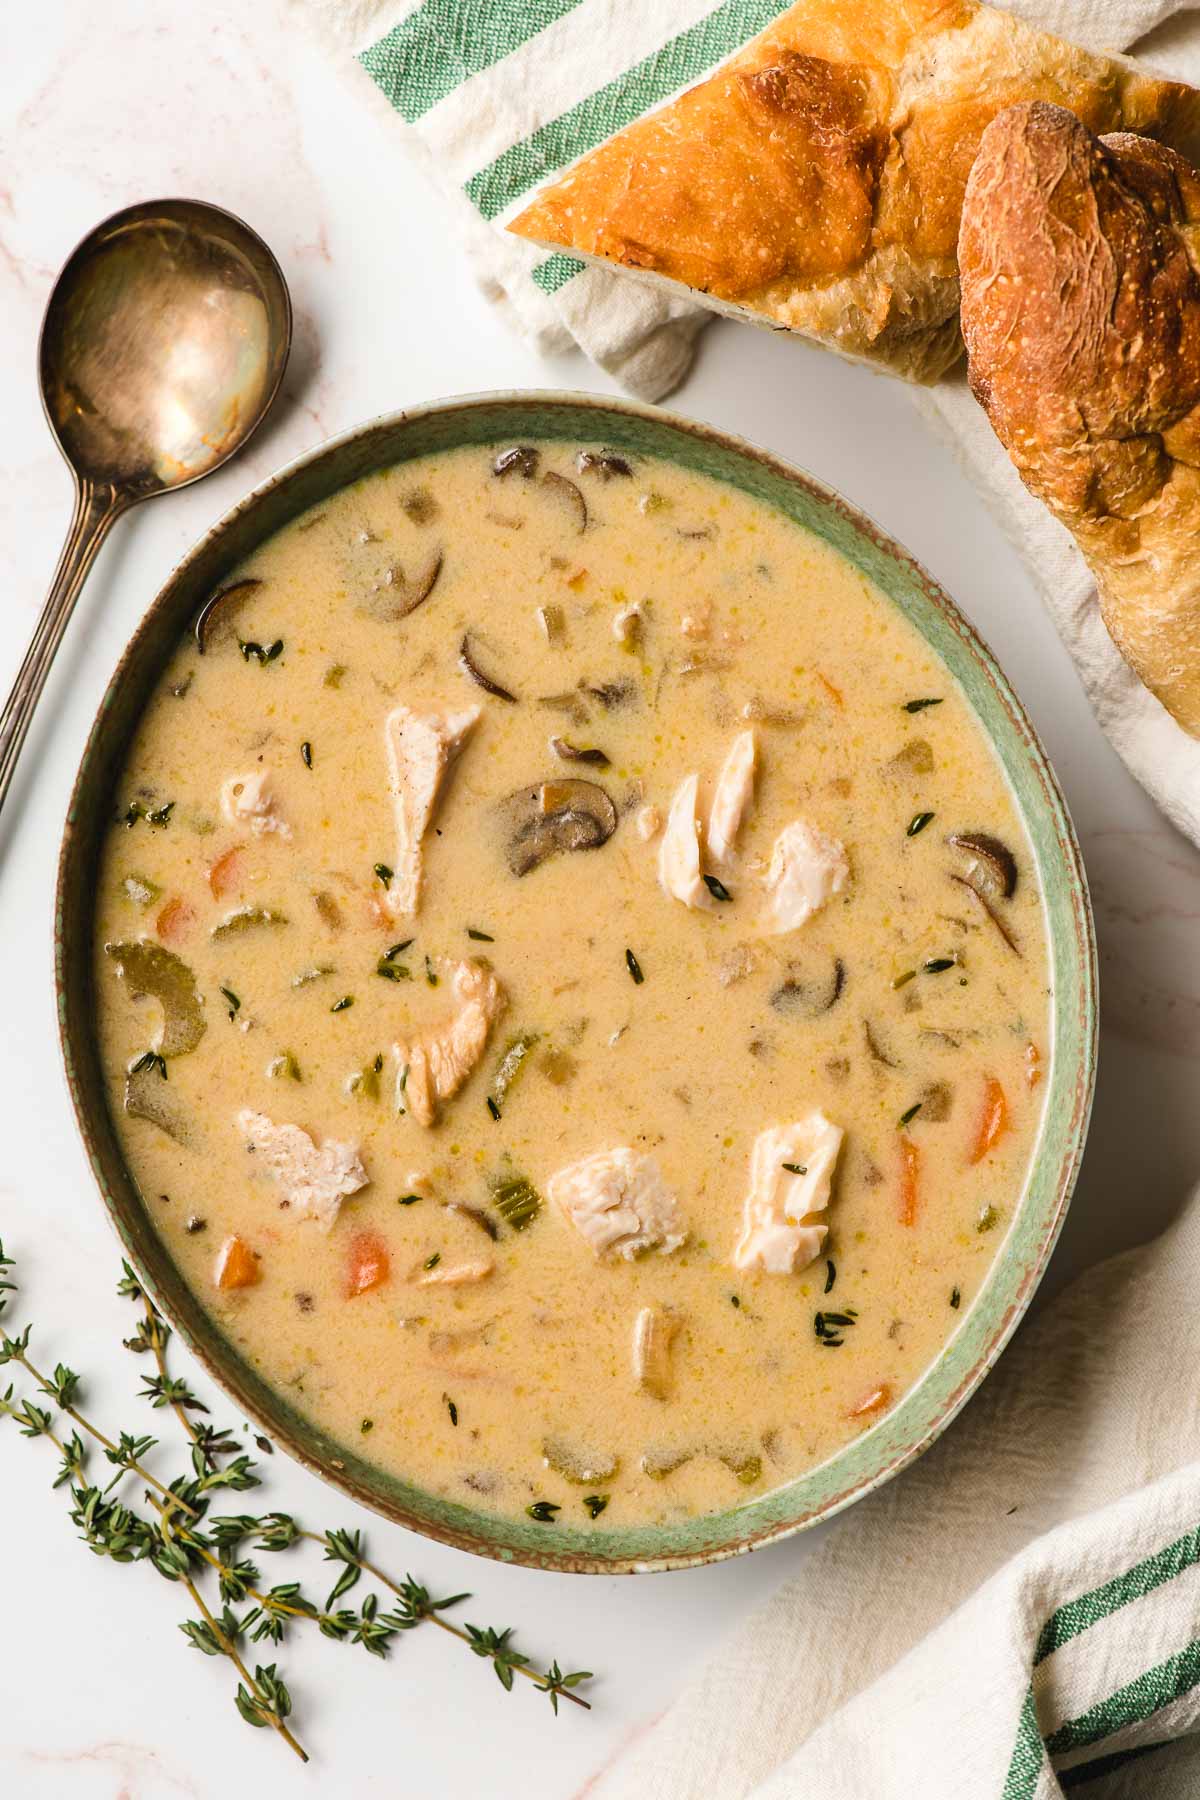 Bowl of Creamy Turkey Soup surrounded by thyme leaves and two hunks of crust French bread.